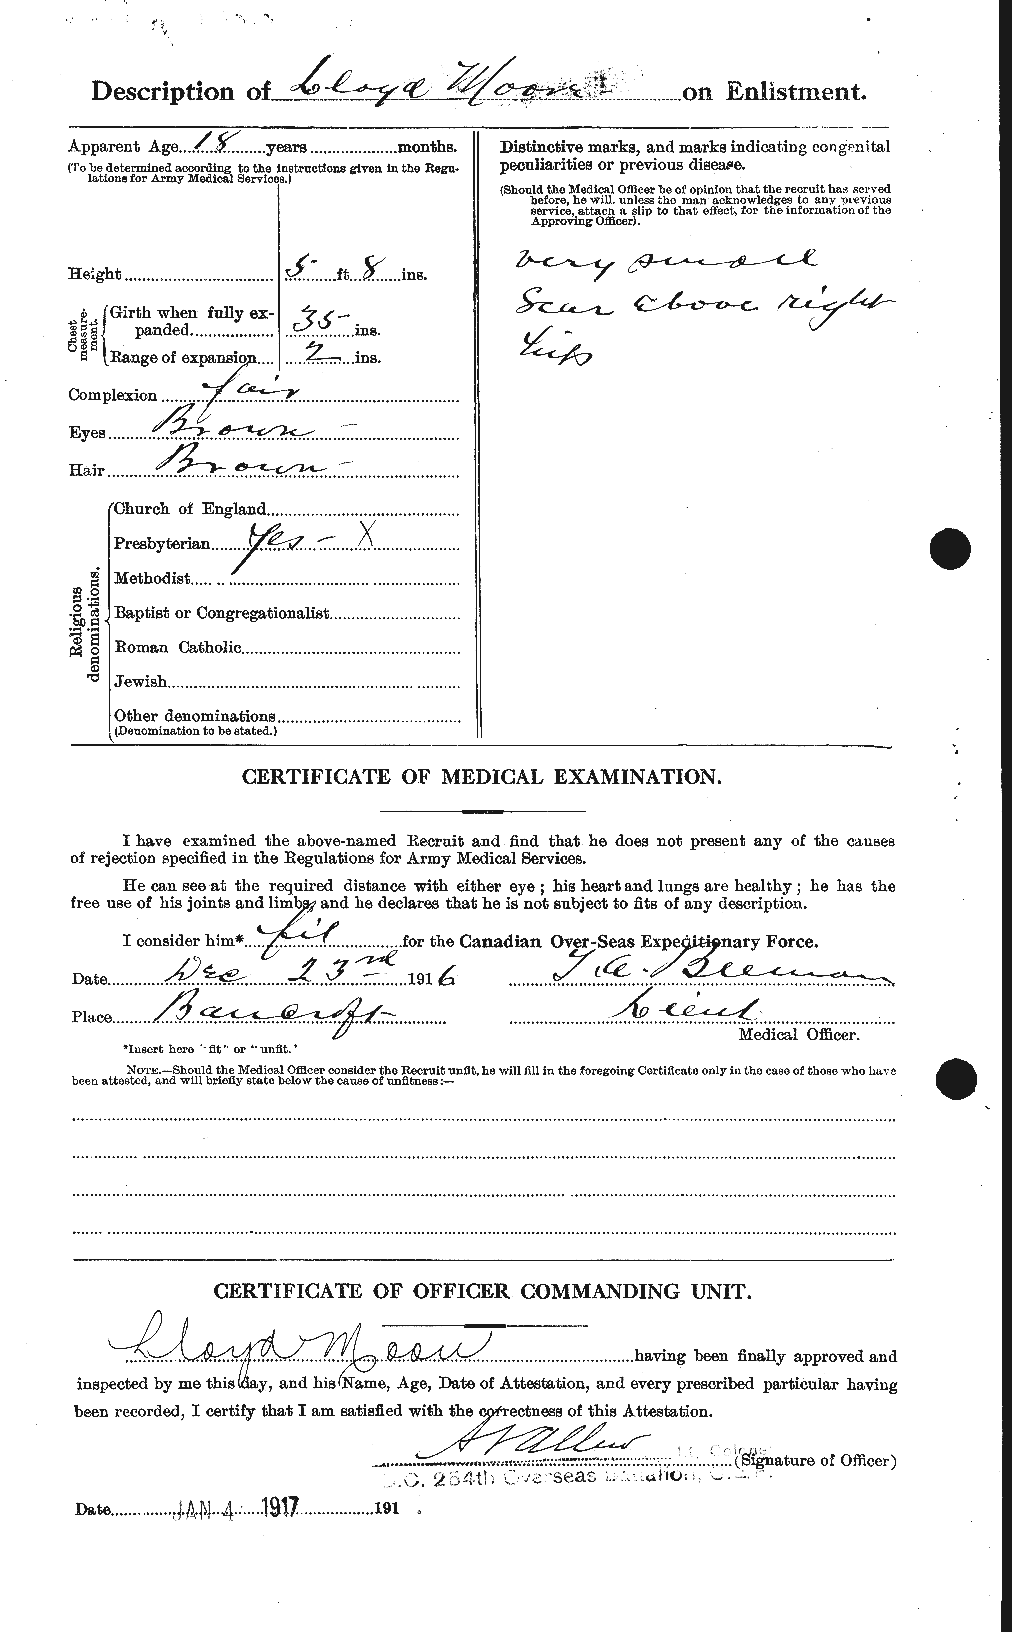 Personnel Records of the First World War - CEF 503417b